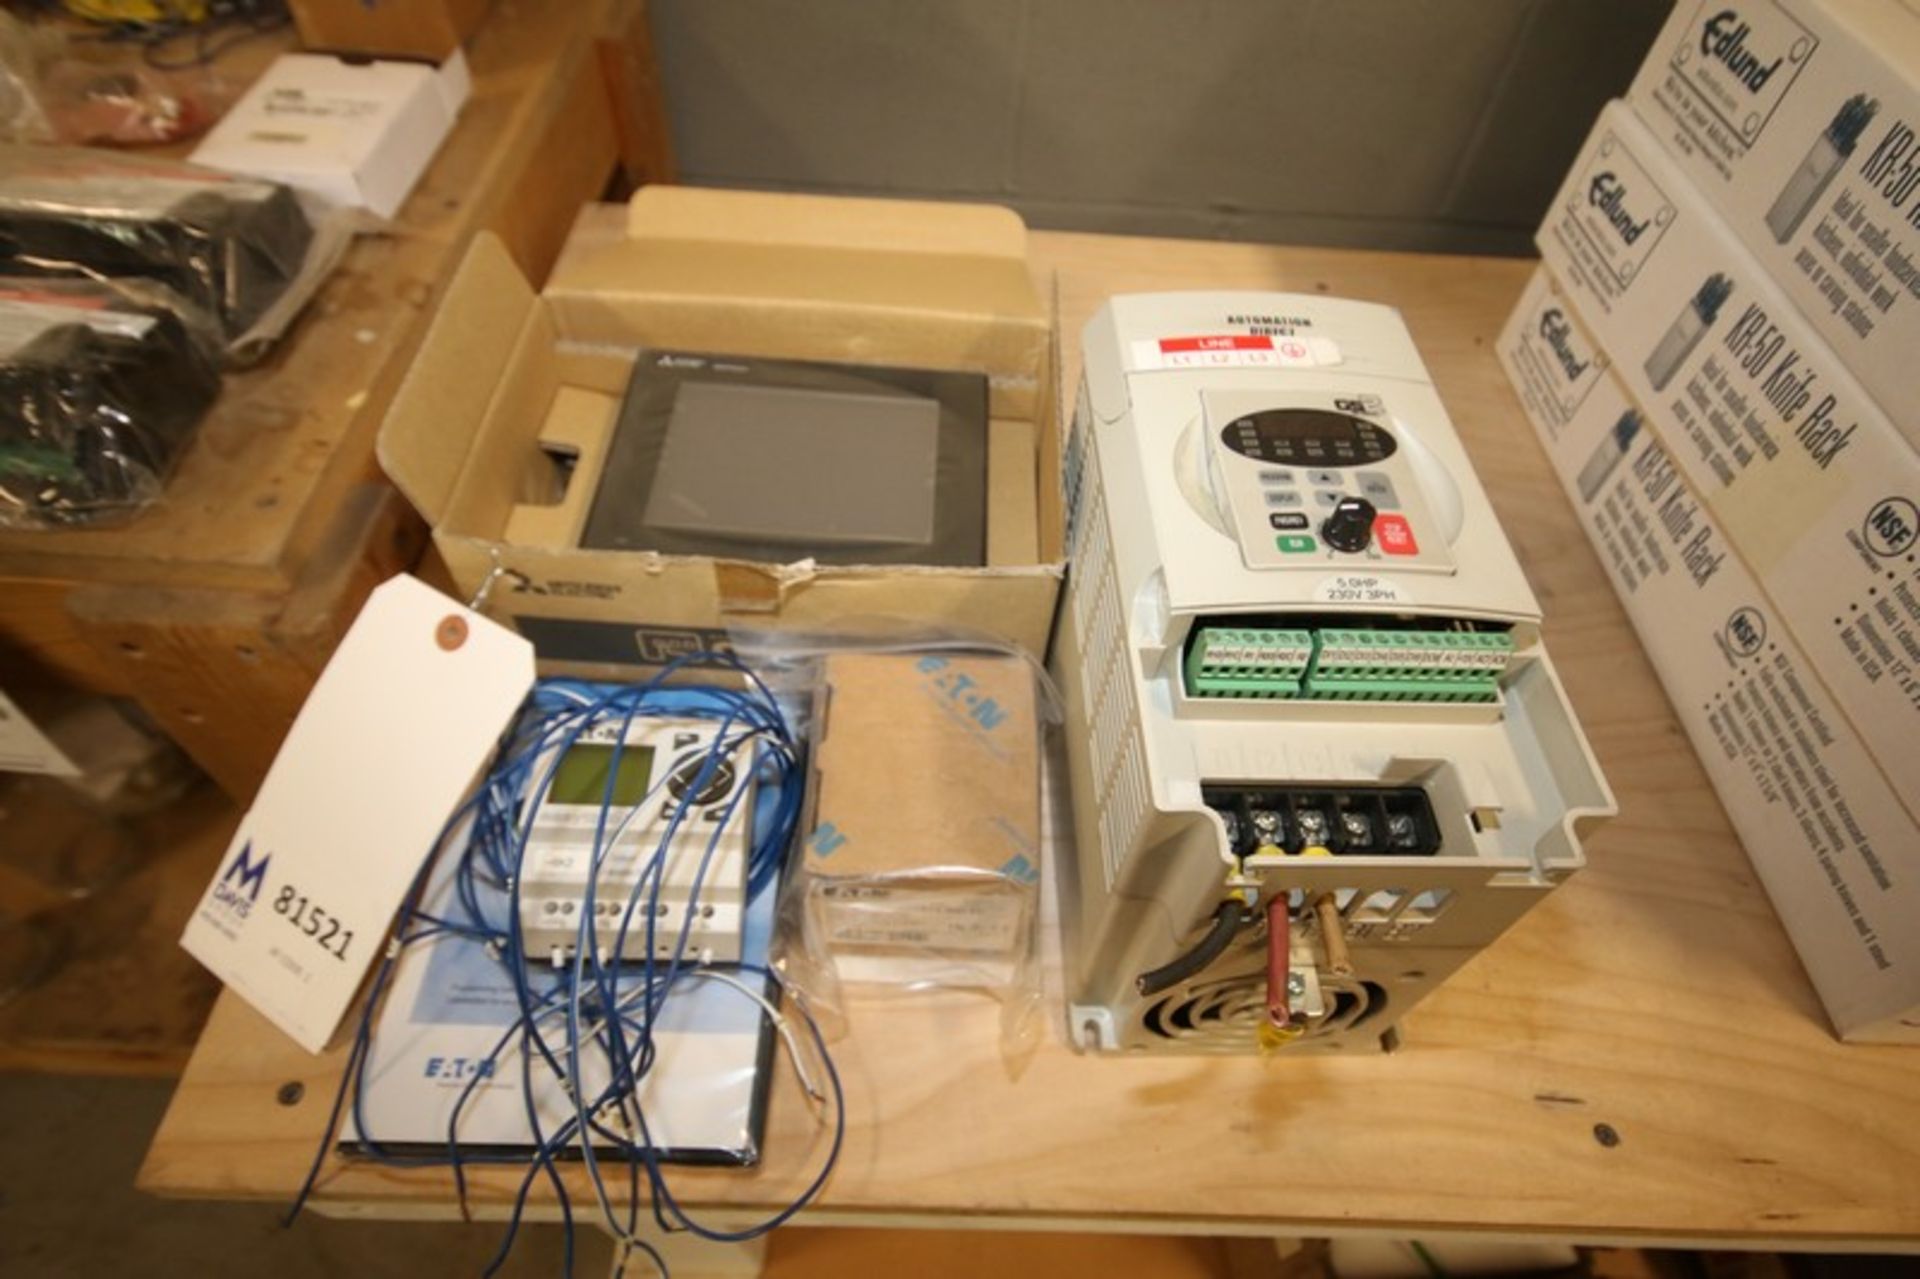 Lot of Assorted Electrical Includes New Mitsubishi Got1000 Display, ETN Transistor & Automation